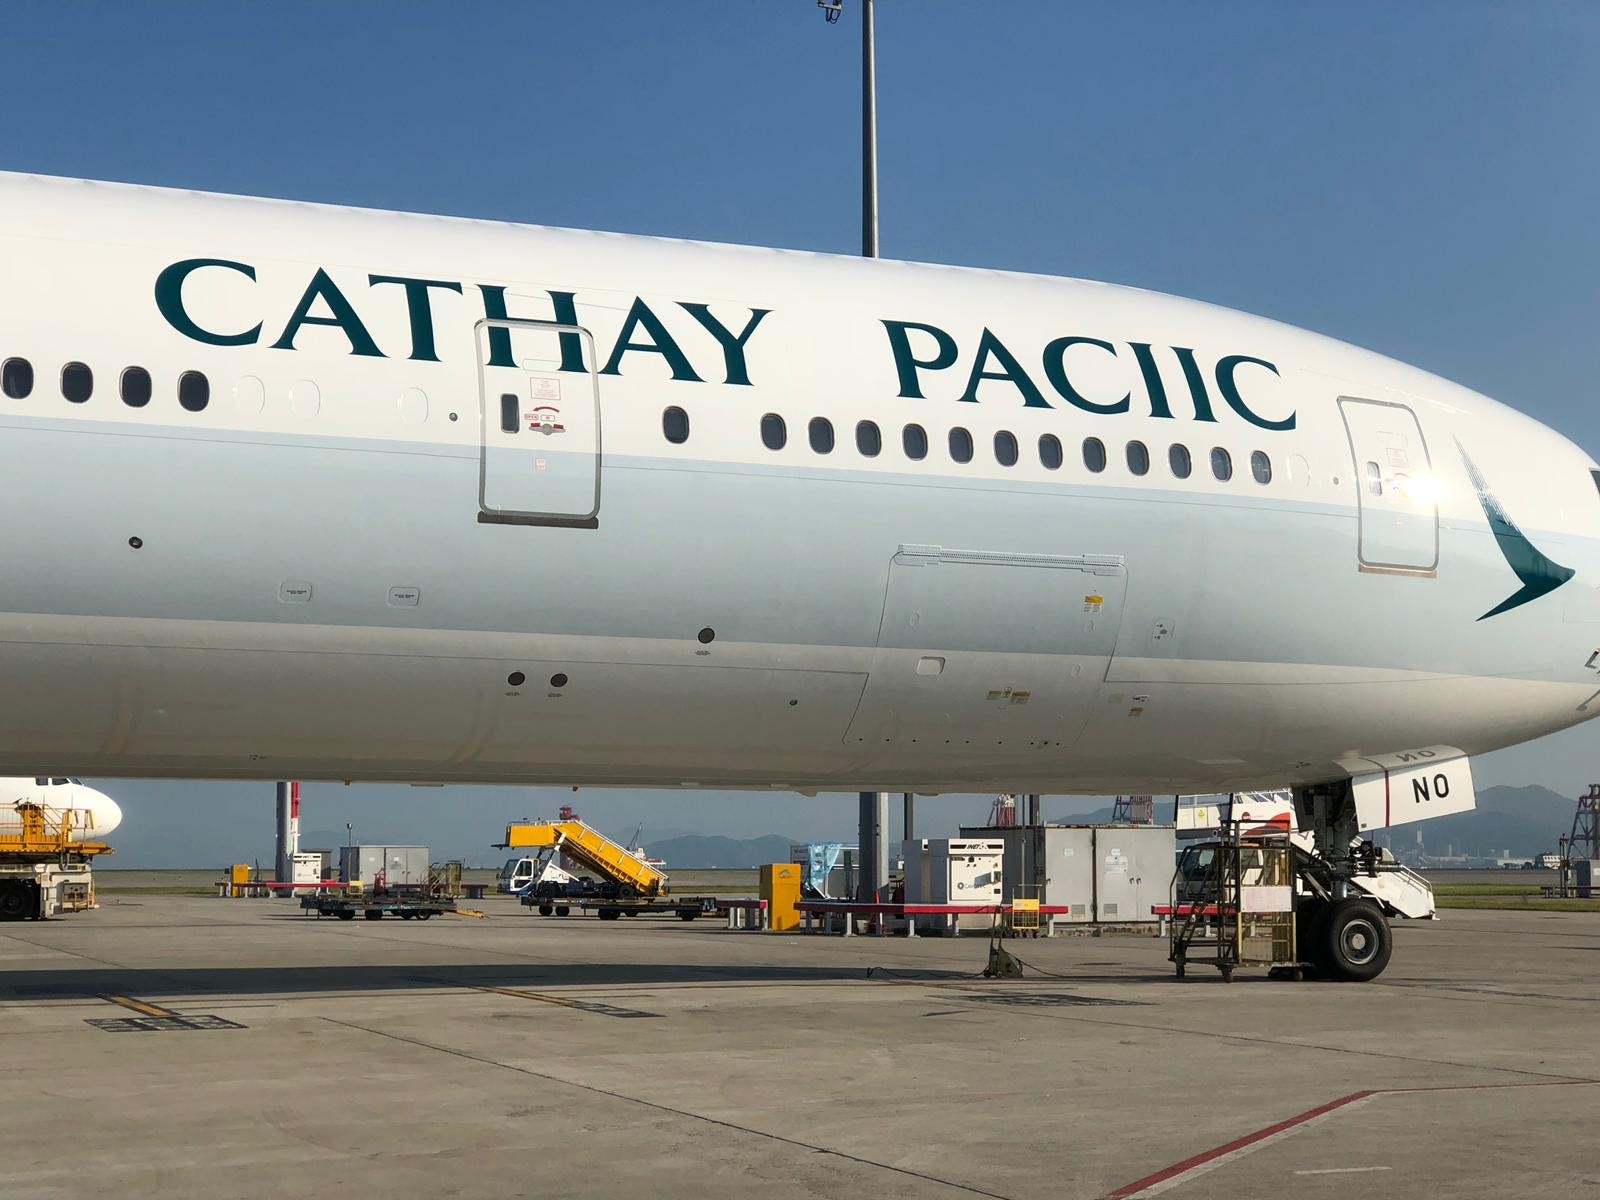 The side of the Cathay Pacific plane read “Cathay Paciic”. Photo: Facebook